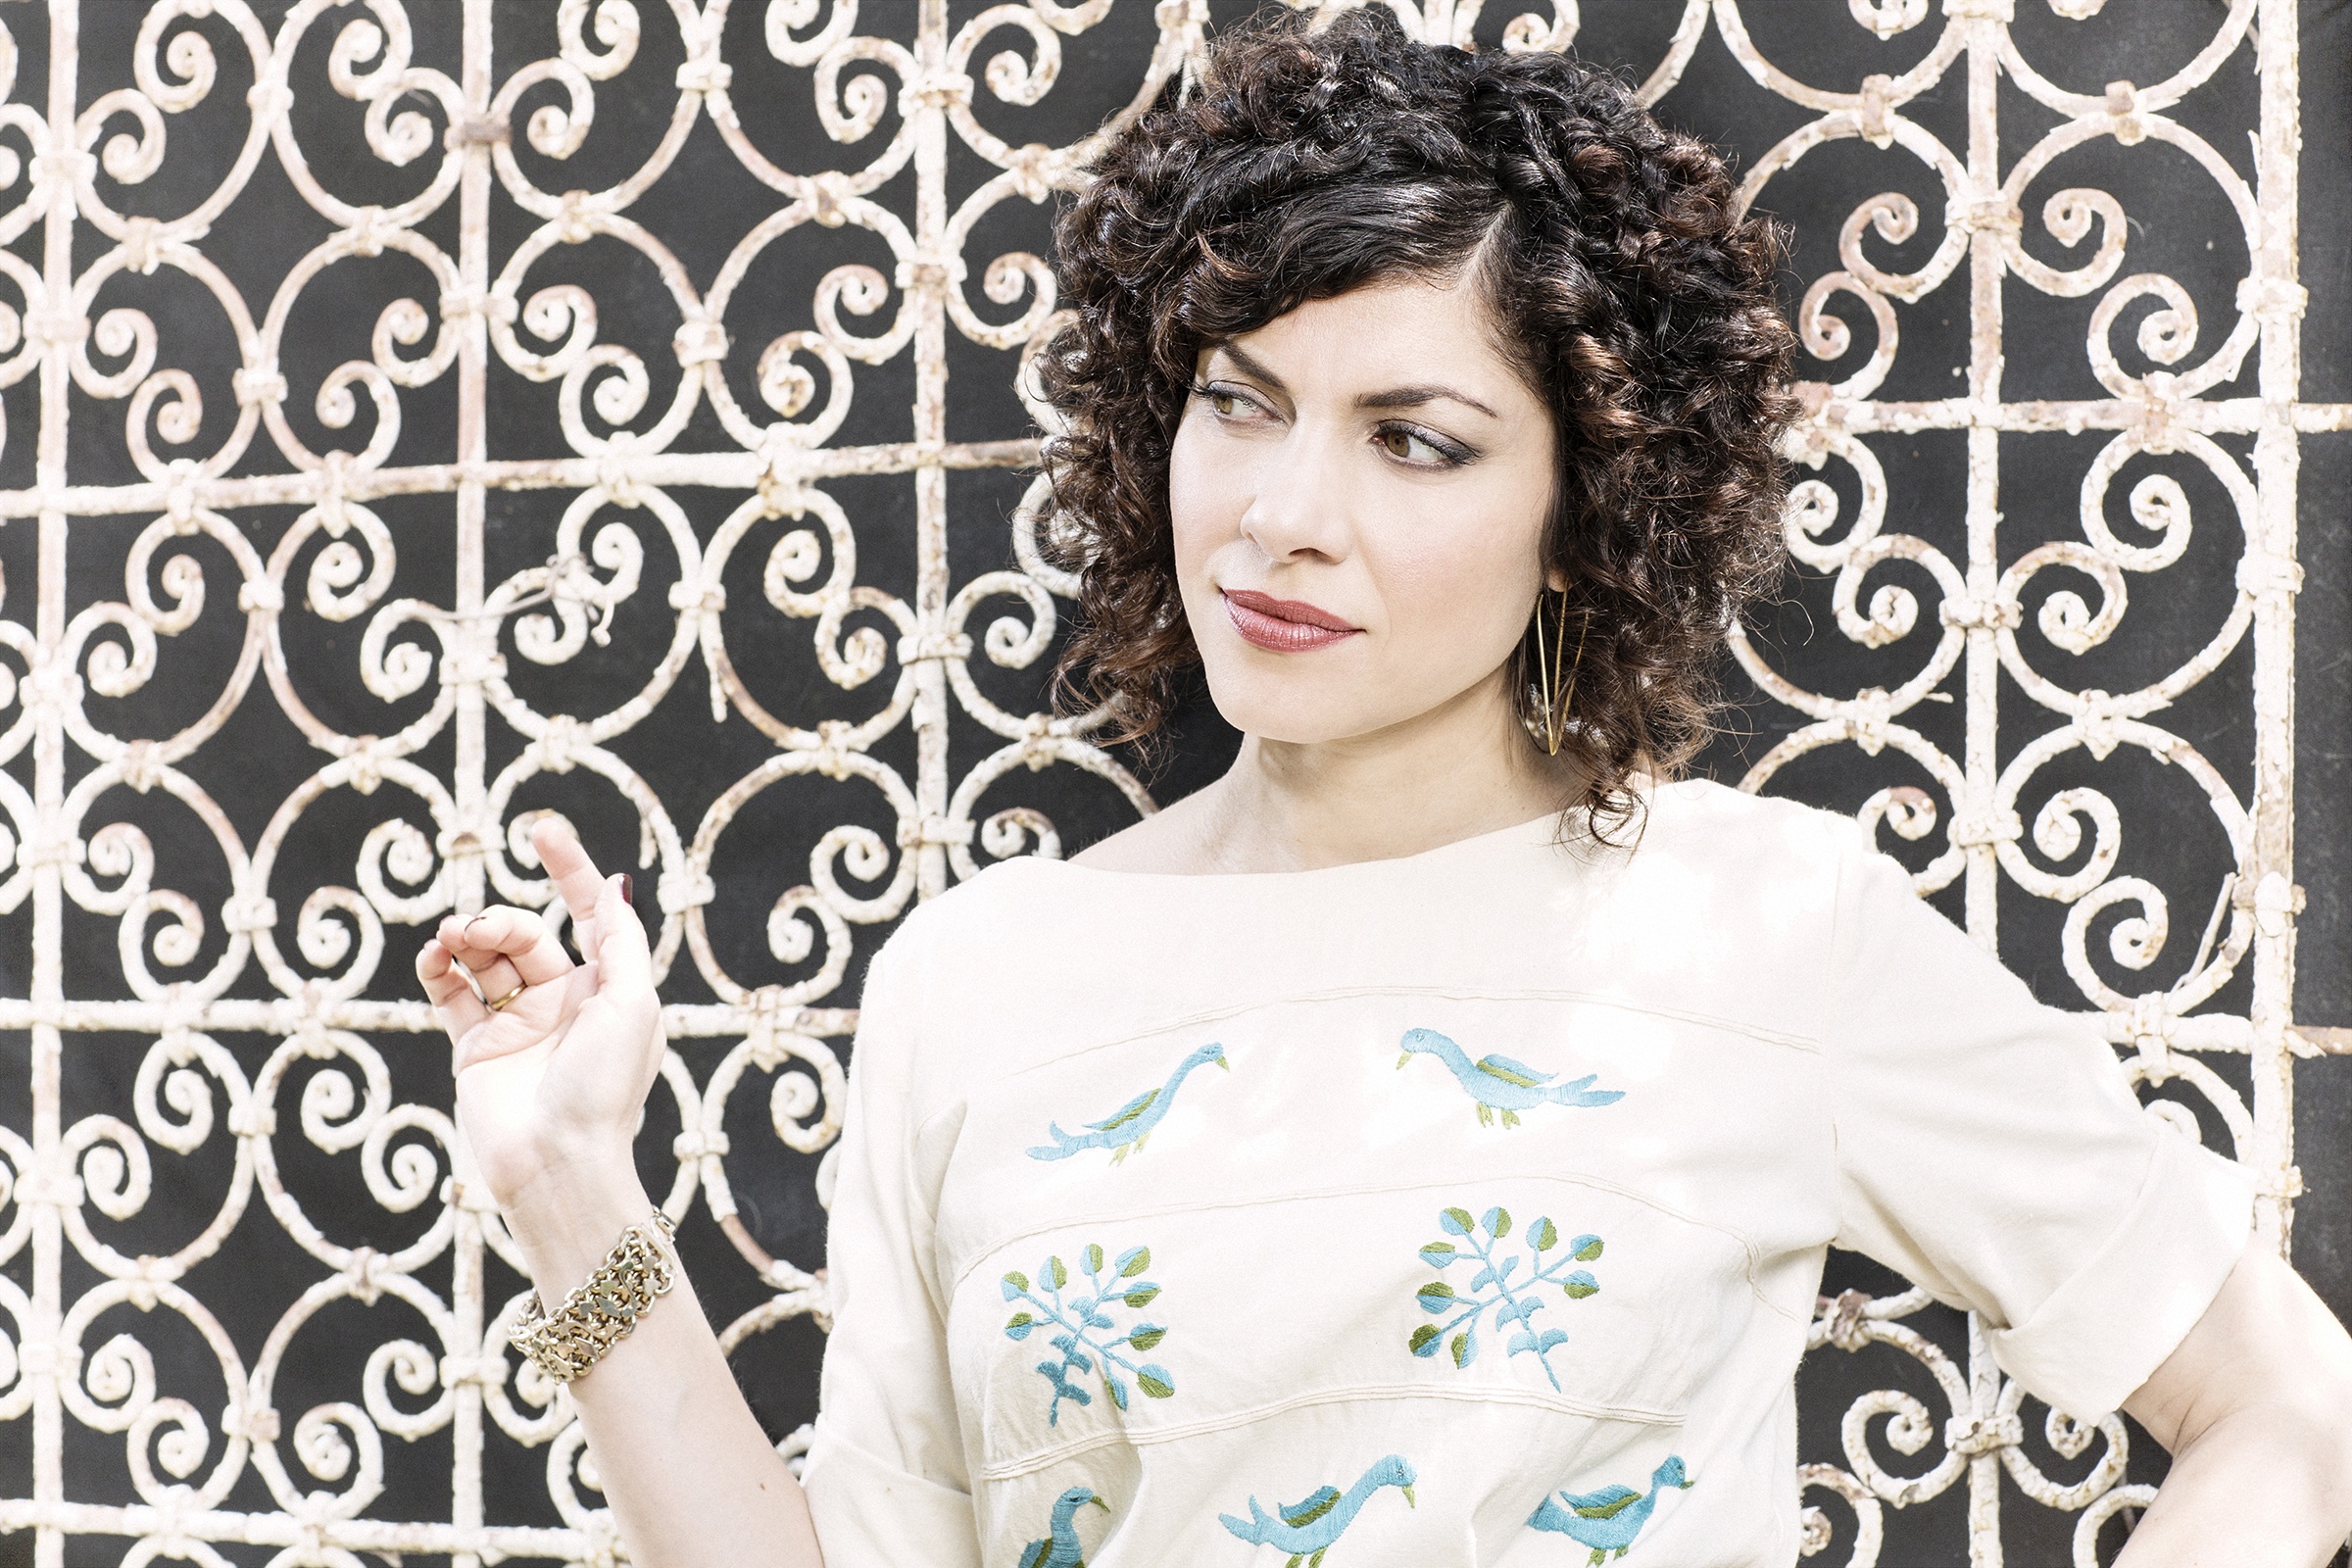 GIFTED - Musicians Carrie Rodriguez and Chip Taylor will be performing at the Elks Lodge in Red Deer on Sept. 15th. The show is being presented by the Central Music Festival Society.